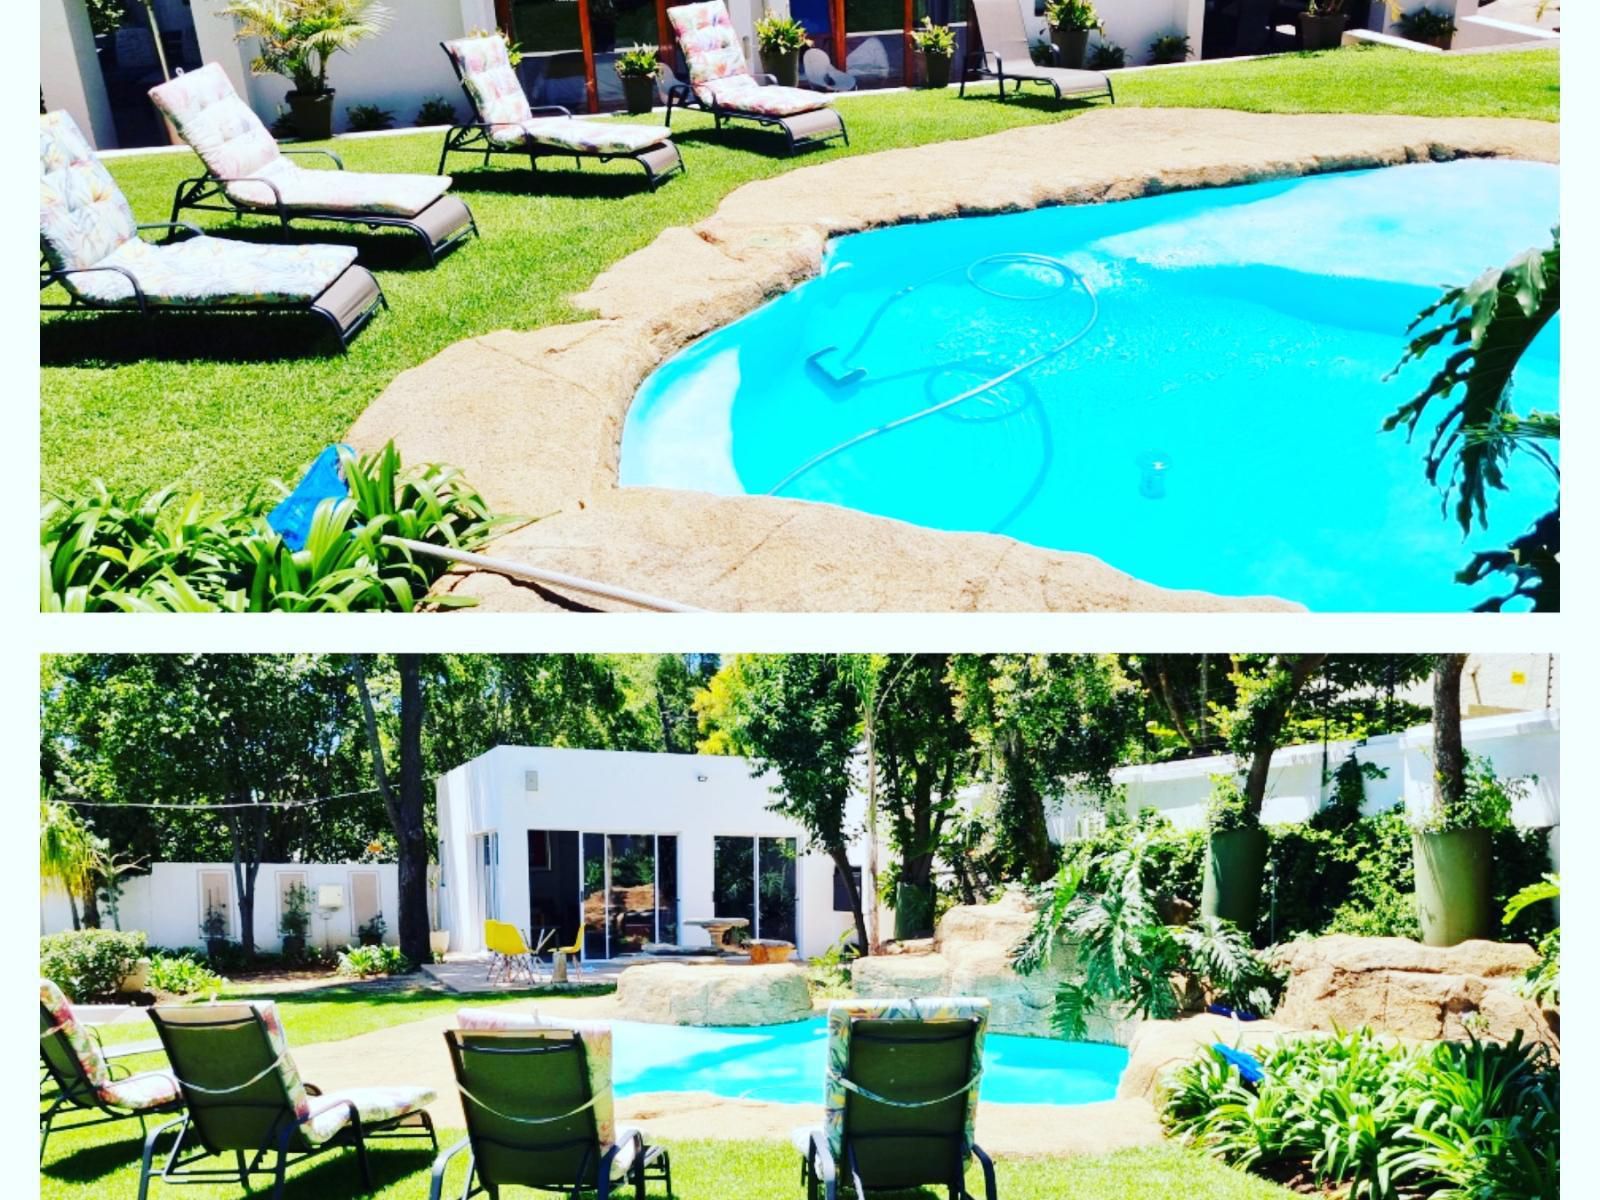 Richtershuyz Lifestyle Guesthouse Brooklyn Pretoria Tshwane Gauteng South Africa Complementary Colors, Palm Tree, Plant, Nature, Wood, Swimming Pool